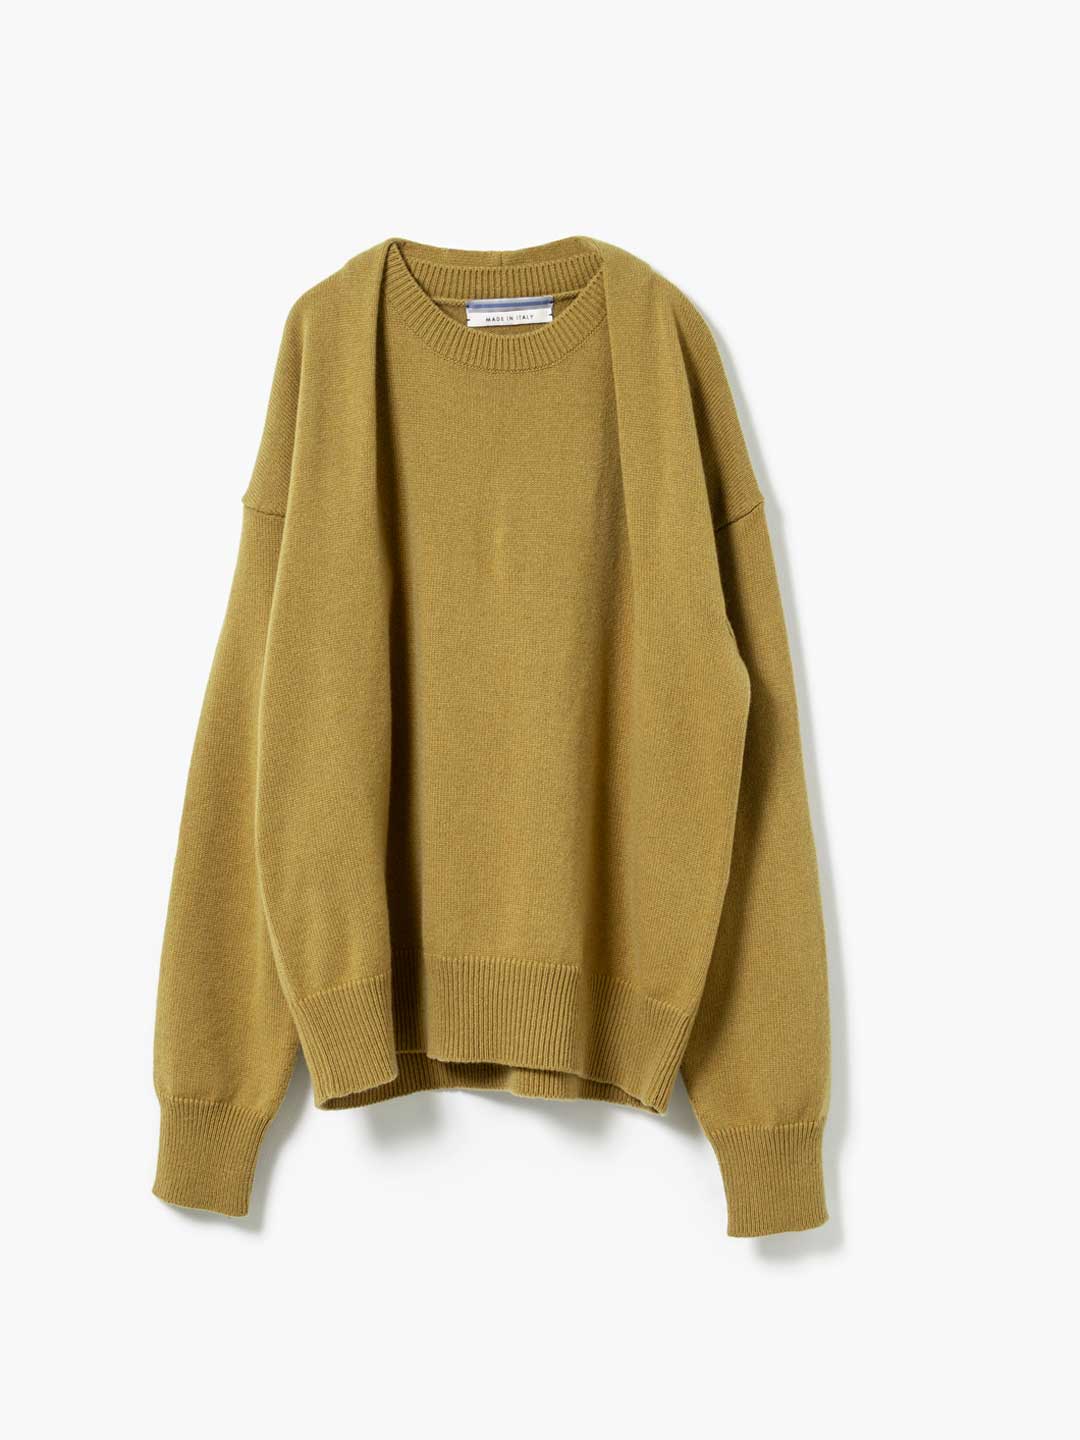 Oversized Cashmere Sweater With Draped Collar - Mustard